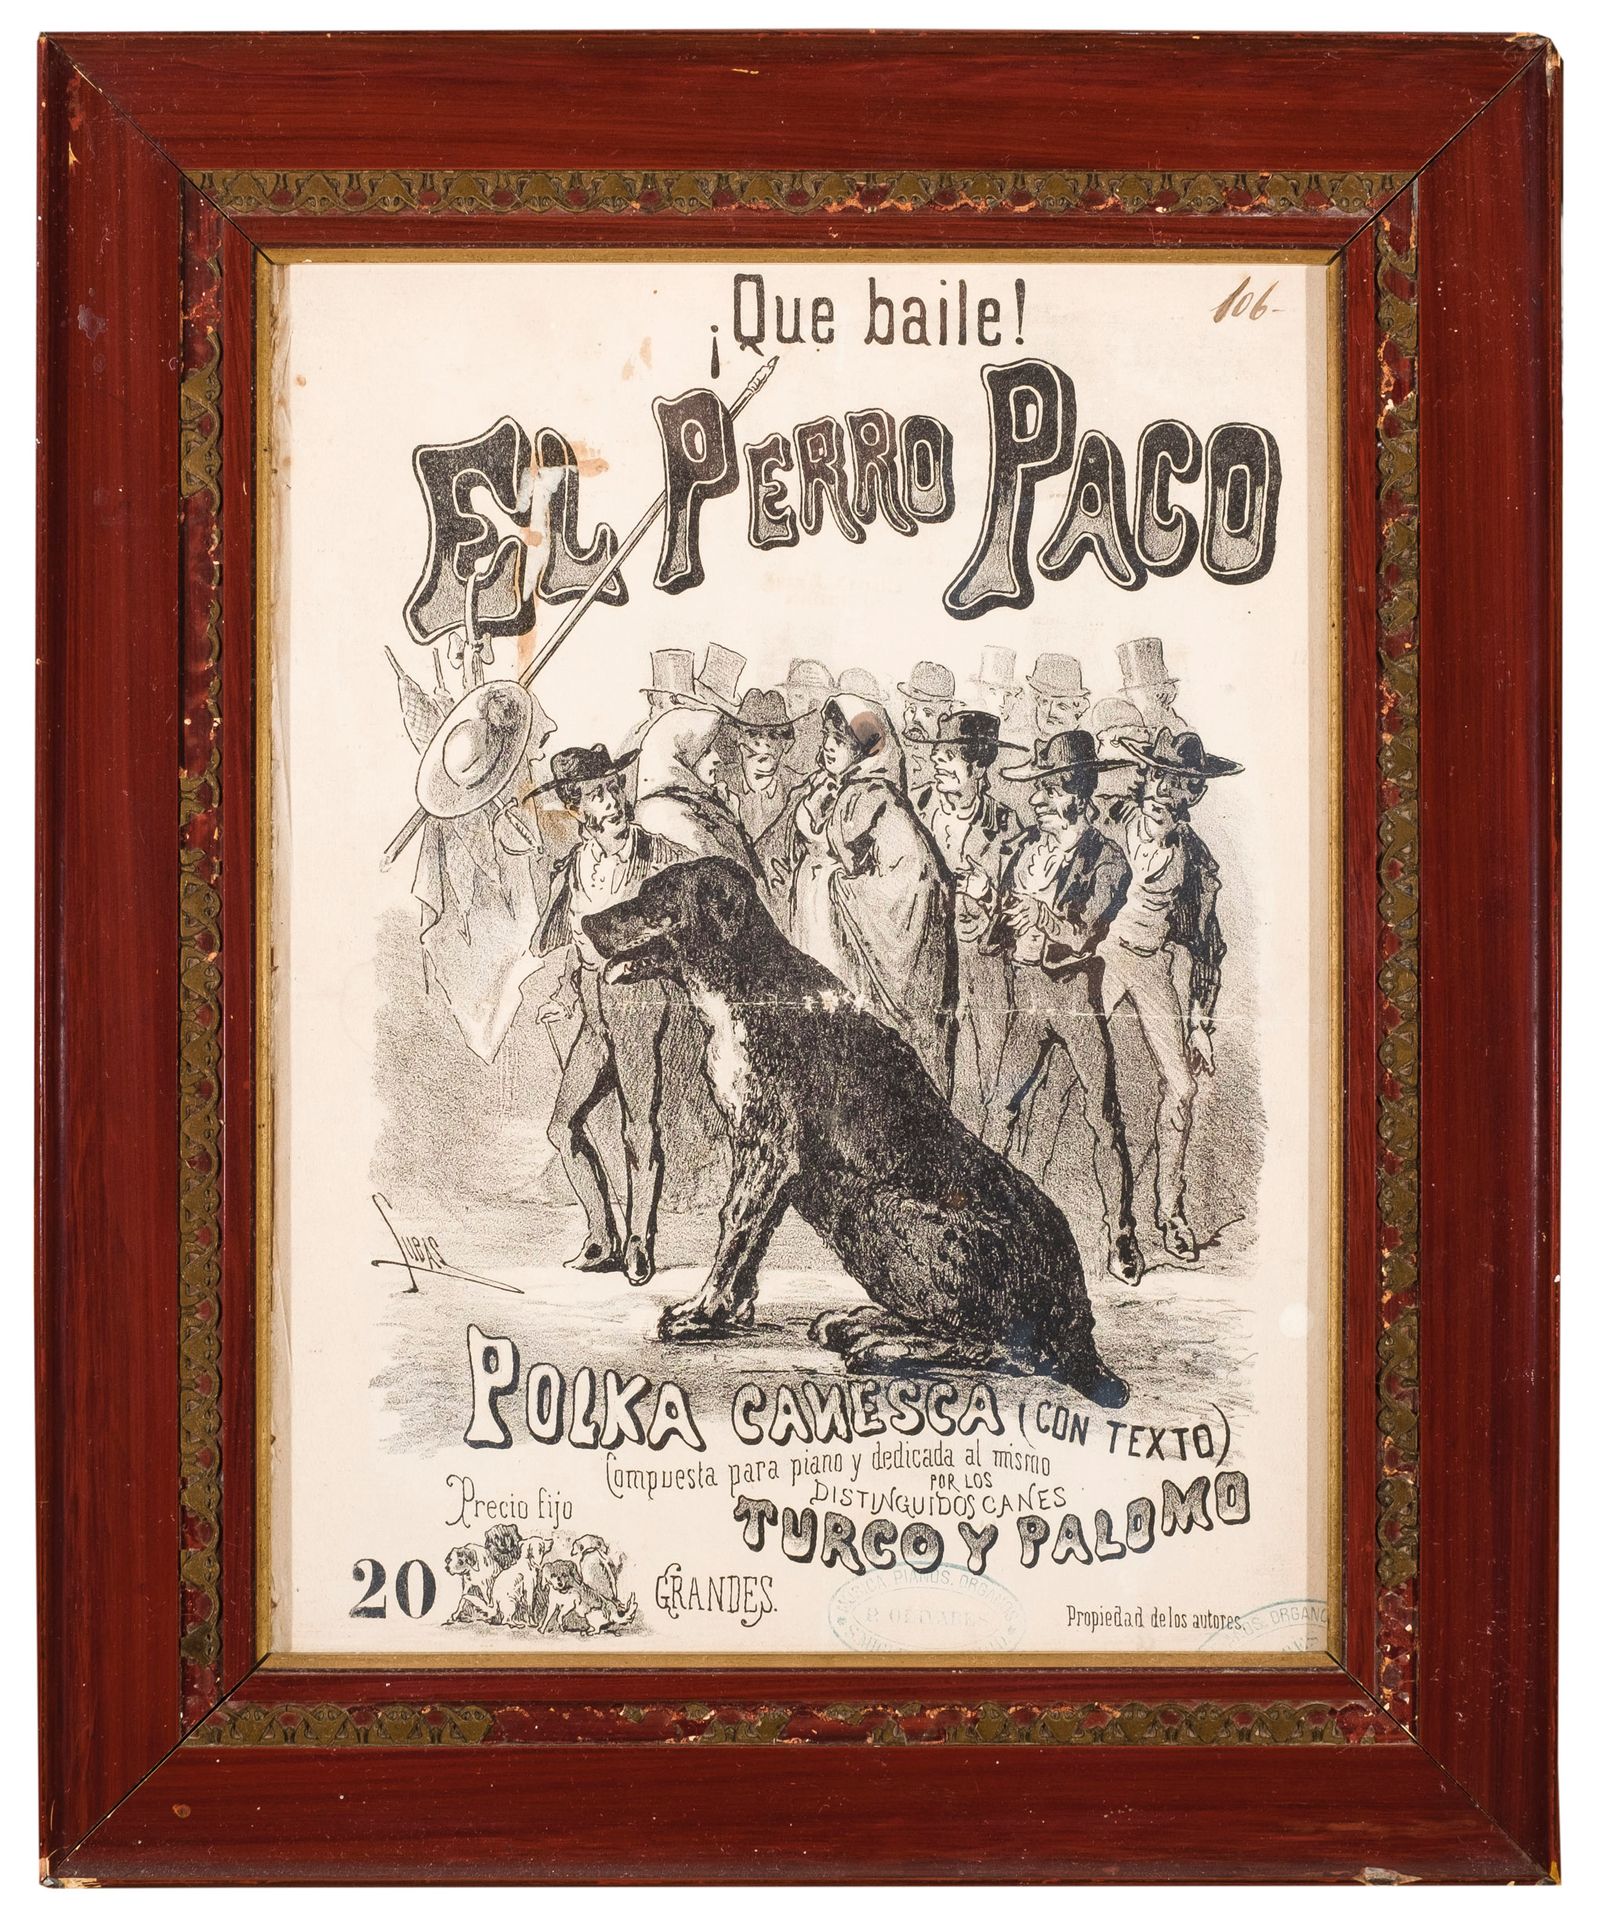 Null "WHAT DANCES! EL PERRO PACO - Polka canesca (with text) composed for piano &hellip;